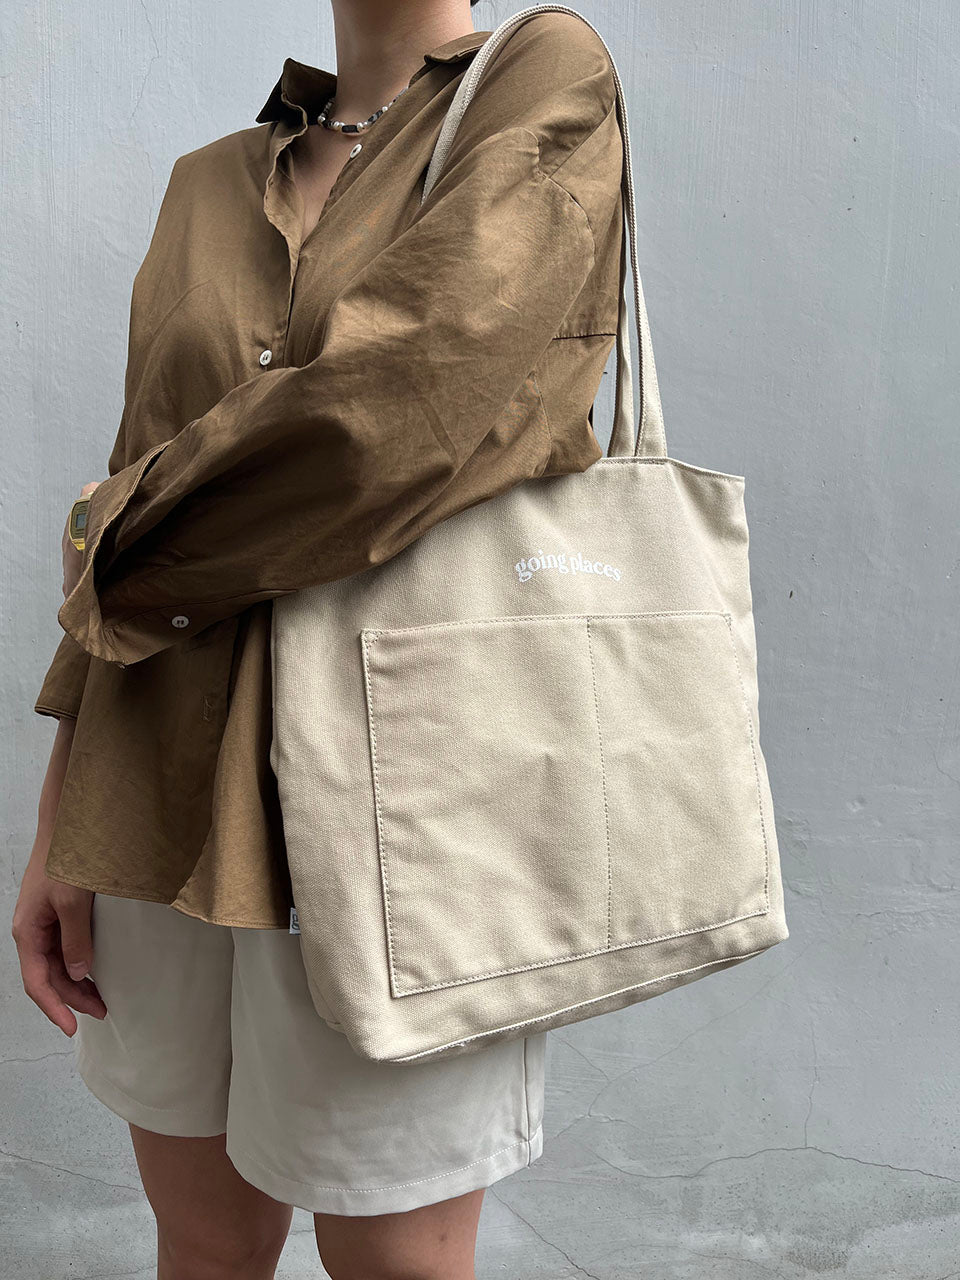 Going Places Tote (Oat)